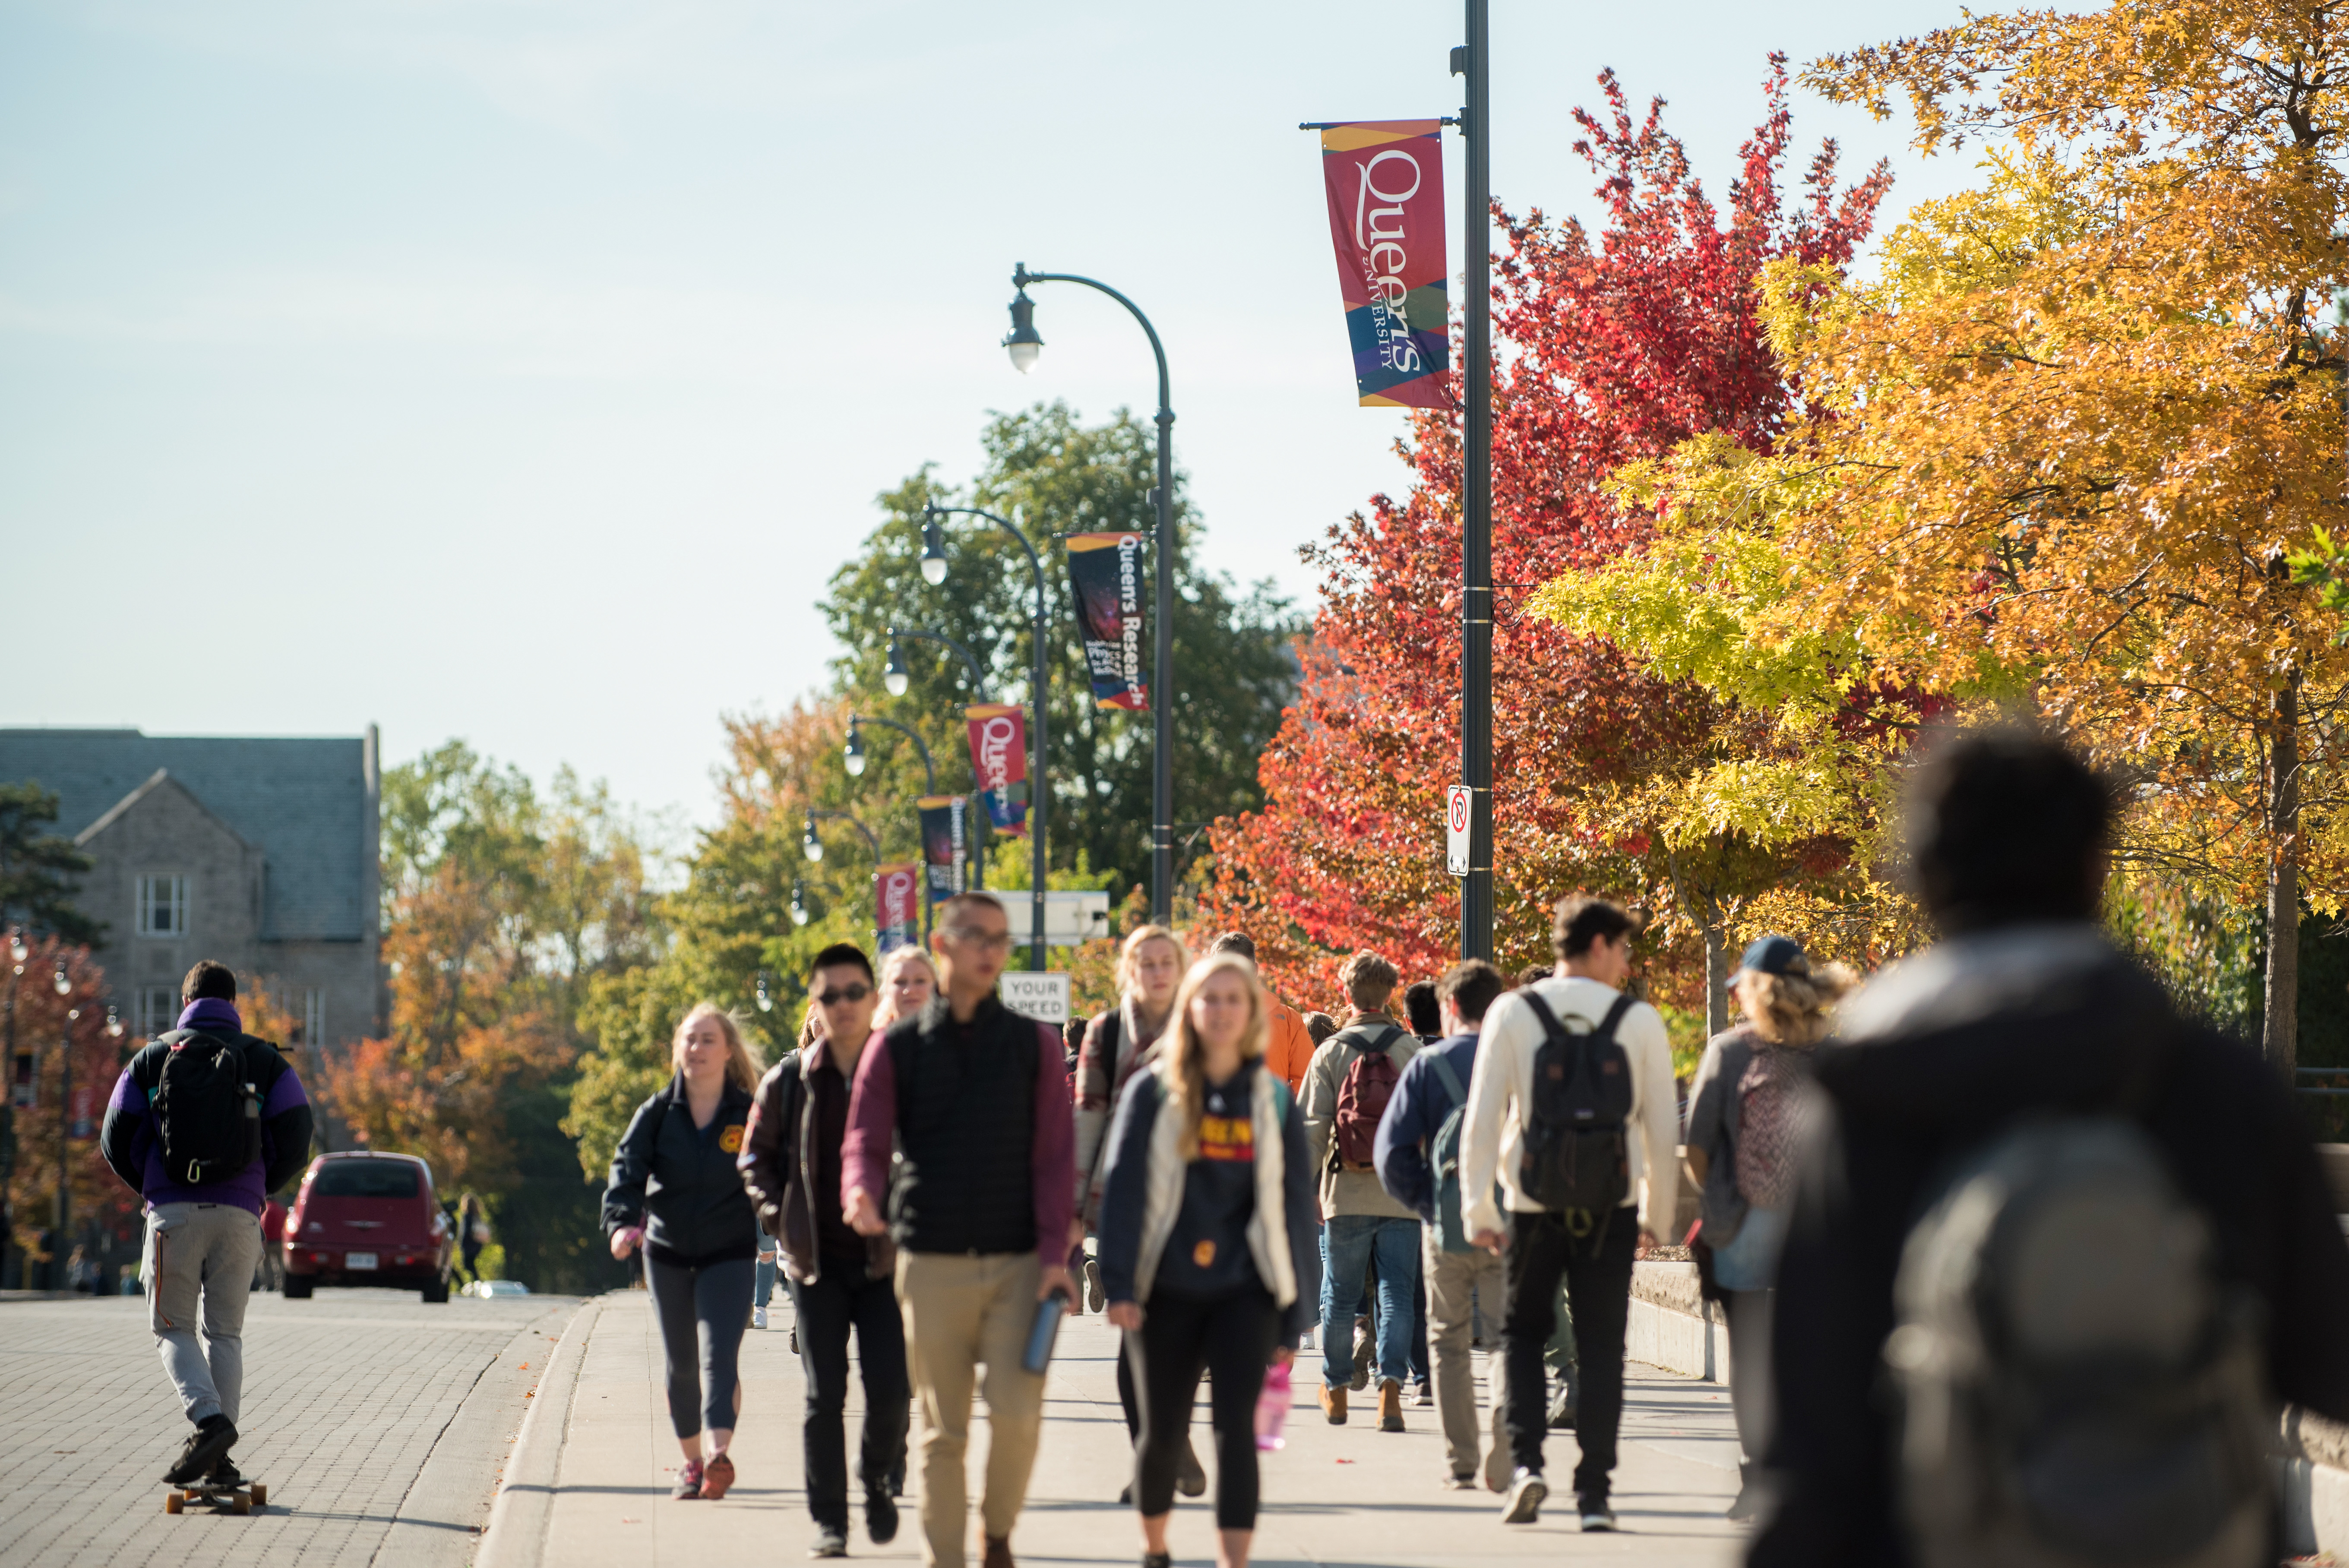 Students walking down the street at Queen's University in the Fall.